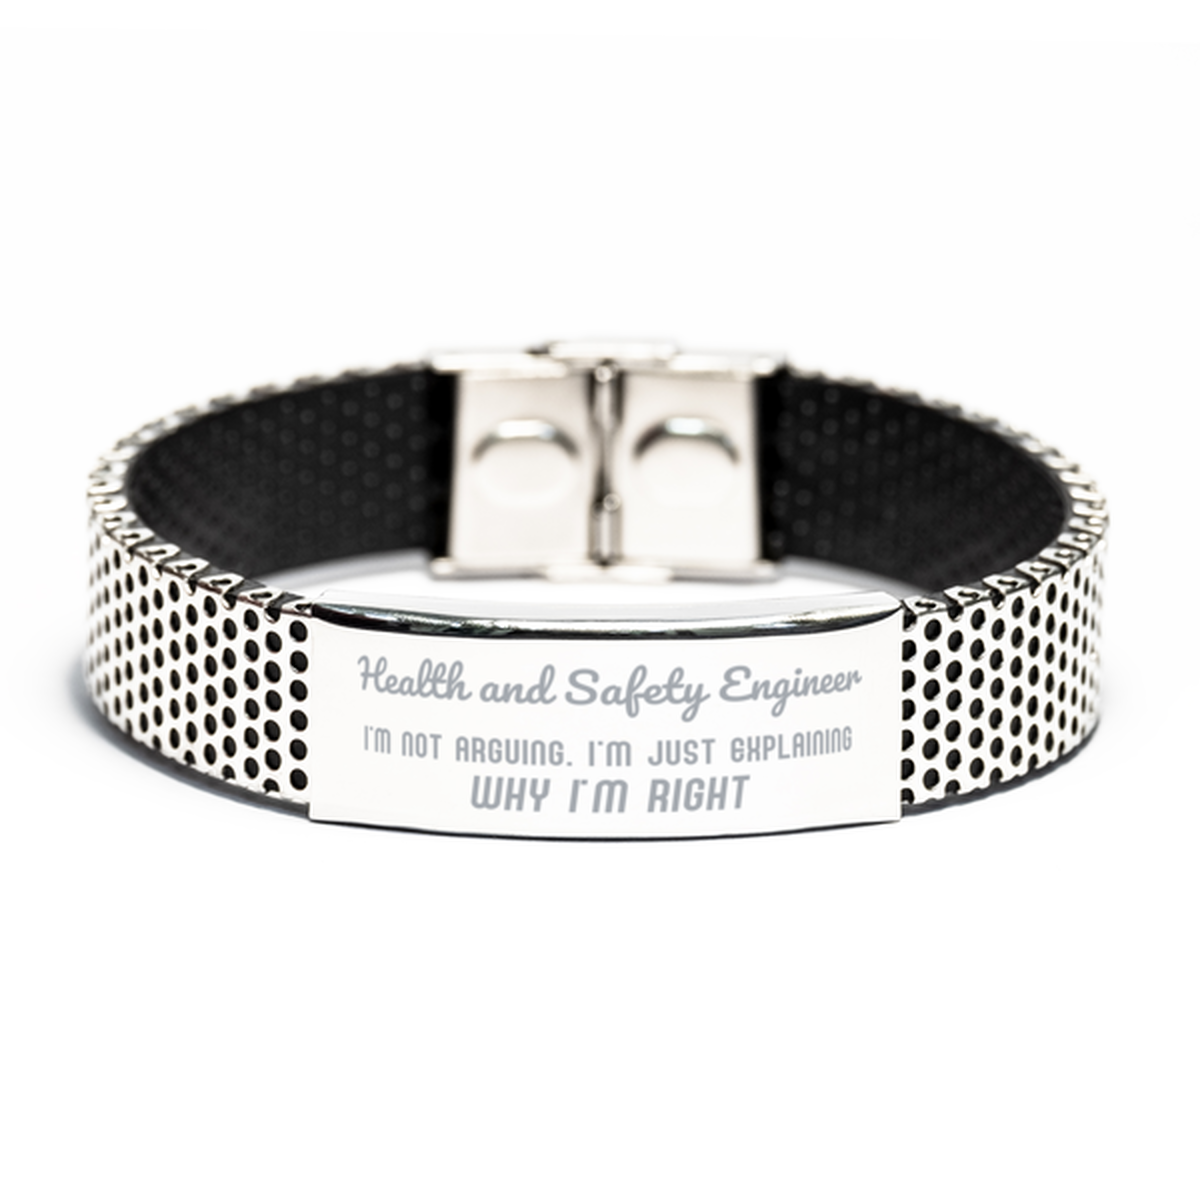 Health and Safety Engineer I'm not Arguing. I'm Just Explaining Why I'm RIGHT Stainless Steel Bracelet, Funny Saying Quote Health and Safety Engineer Gifts For Health and Safety Engineer Graduation Birthday Christmas Gifts for Men Women Coworker